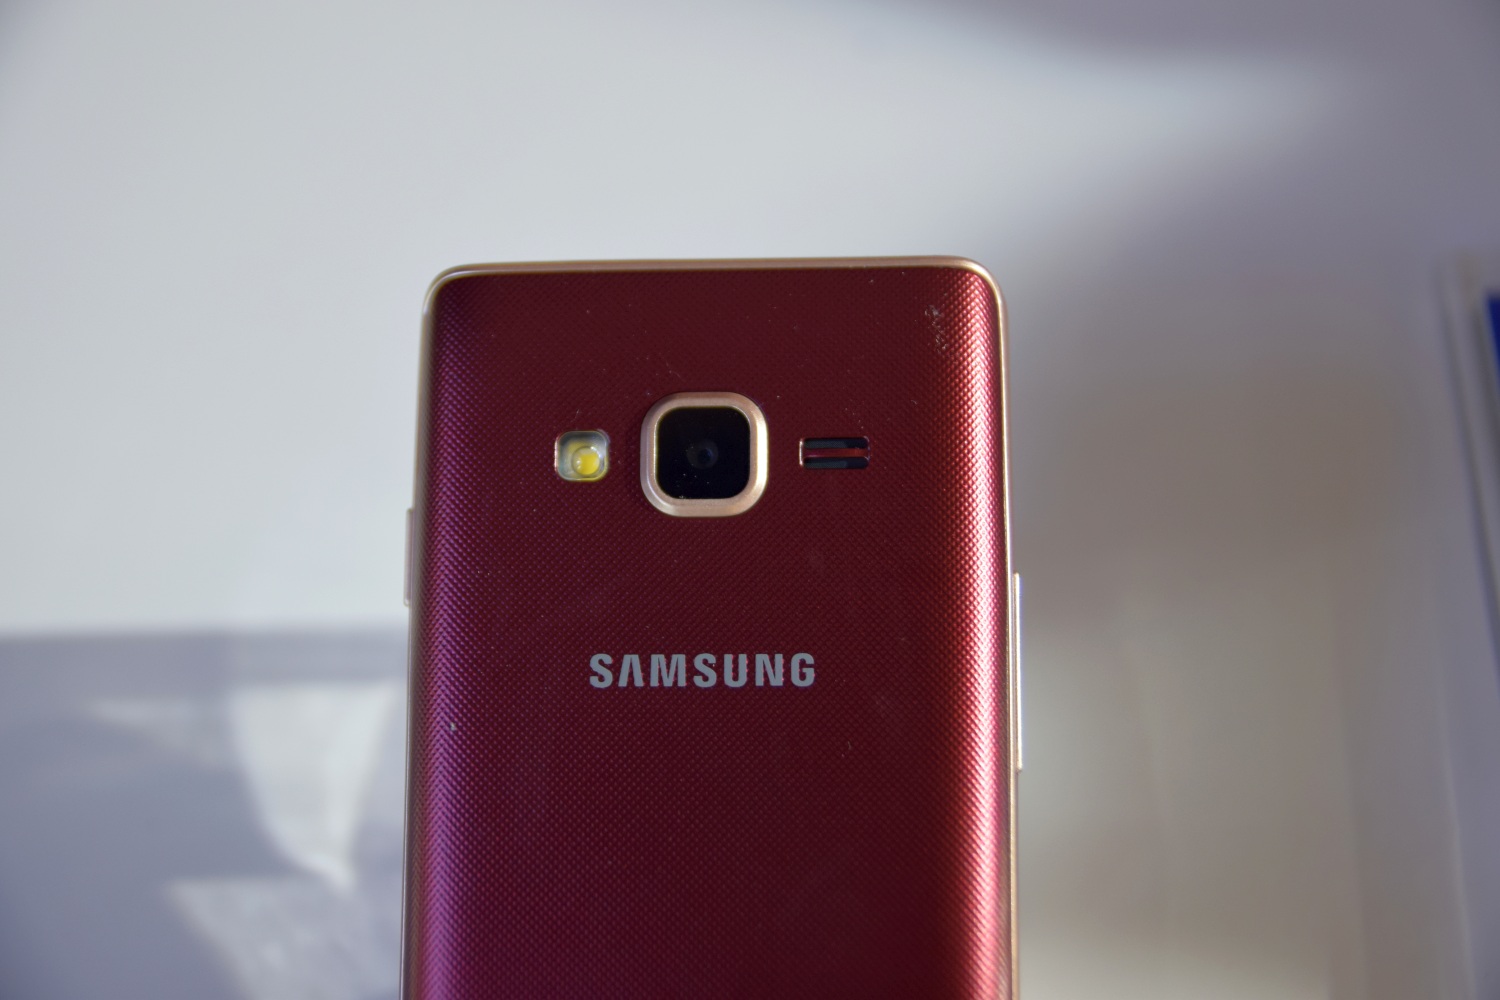 Hands-on experience with the Tizen-based Samsung Z2 